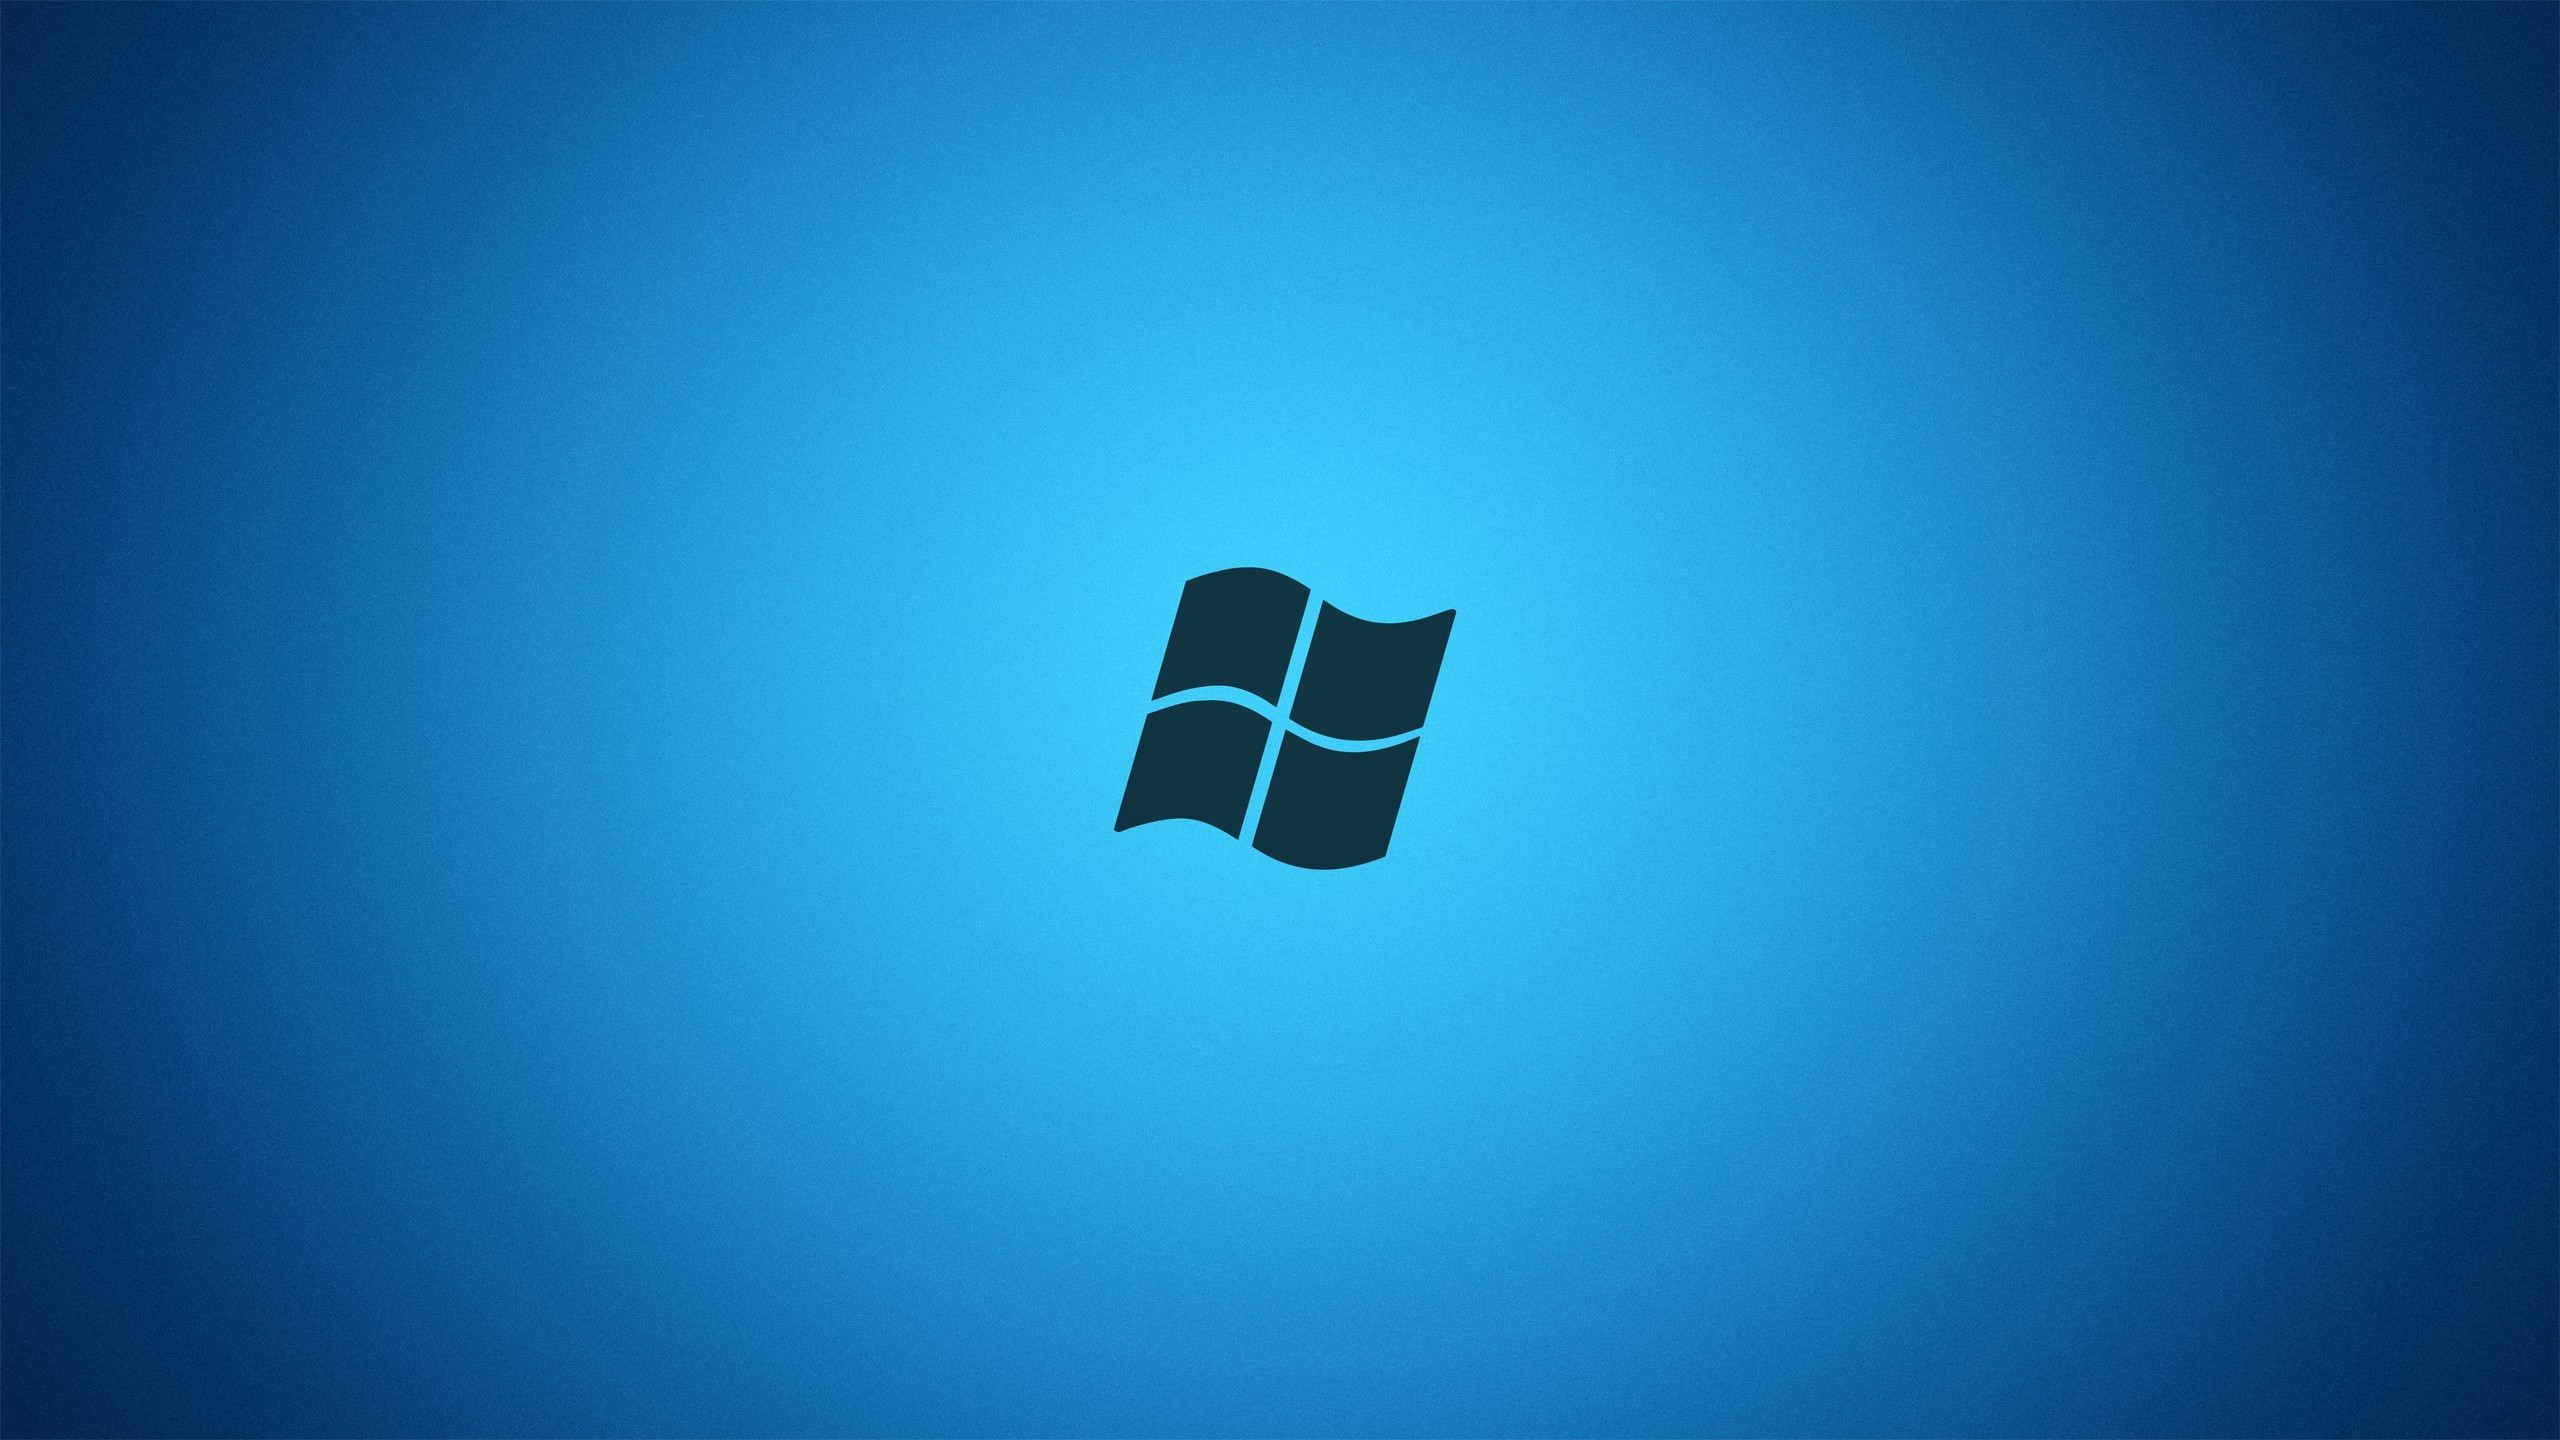 Windows 7 Simple, HD Computer, 4k Wallpapers, Images, Backgrounds